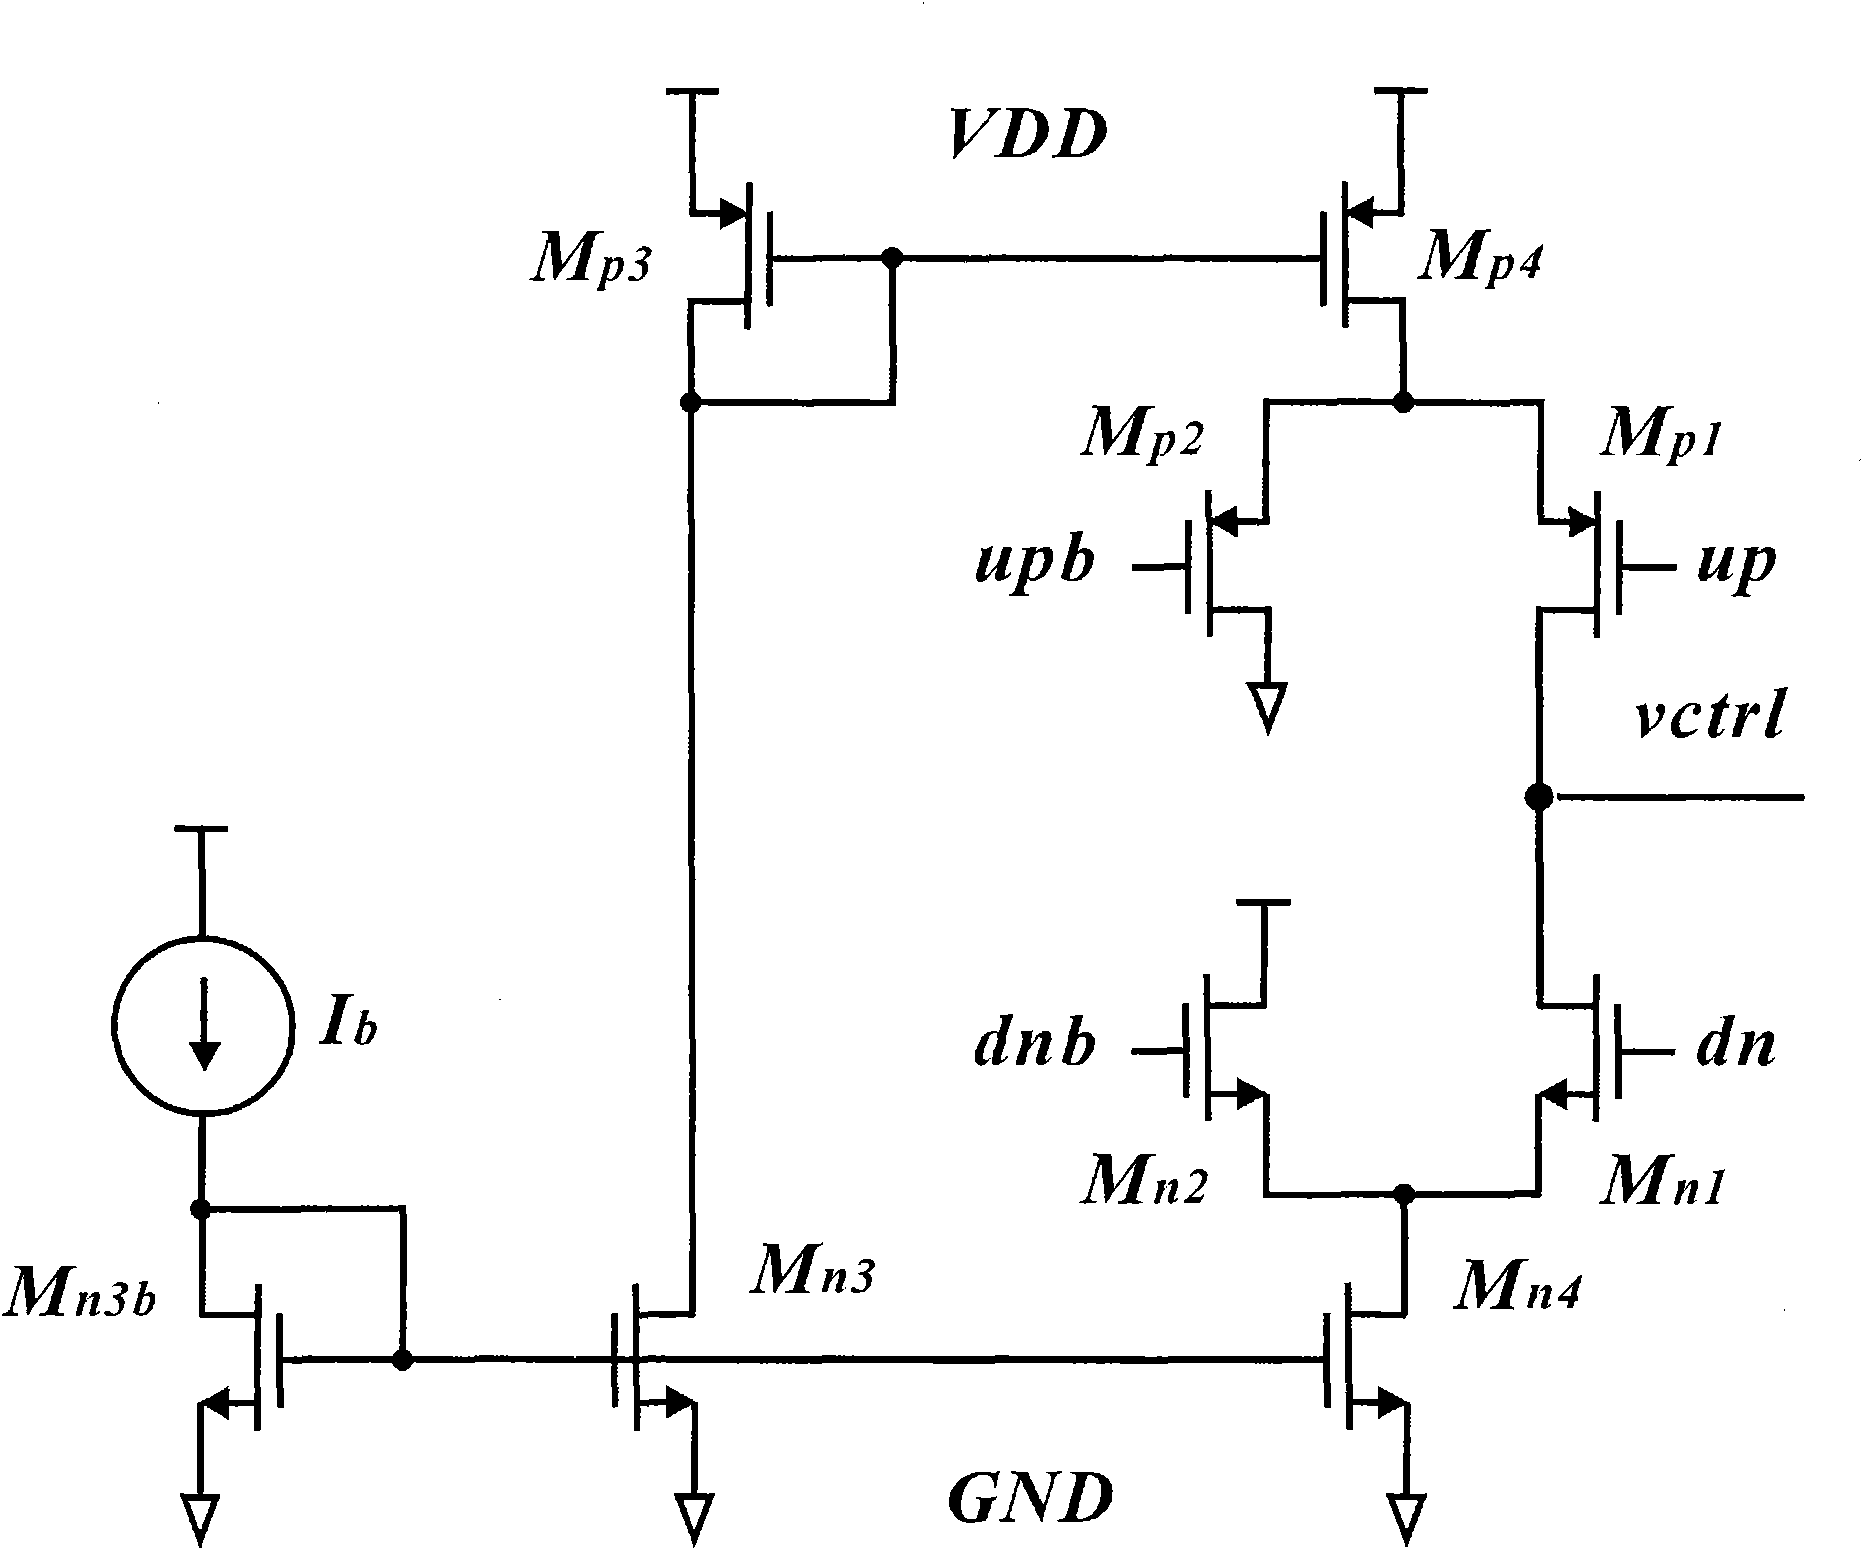 Automatic-tracking current type charge pump for phase-locking loop